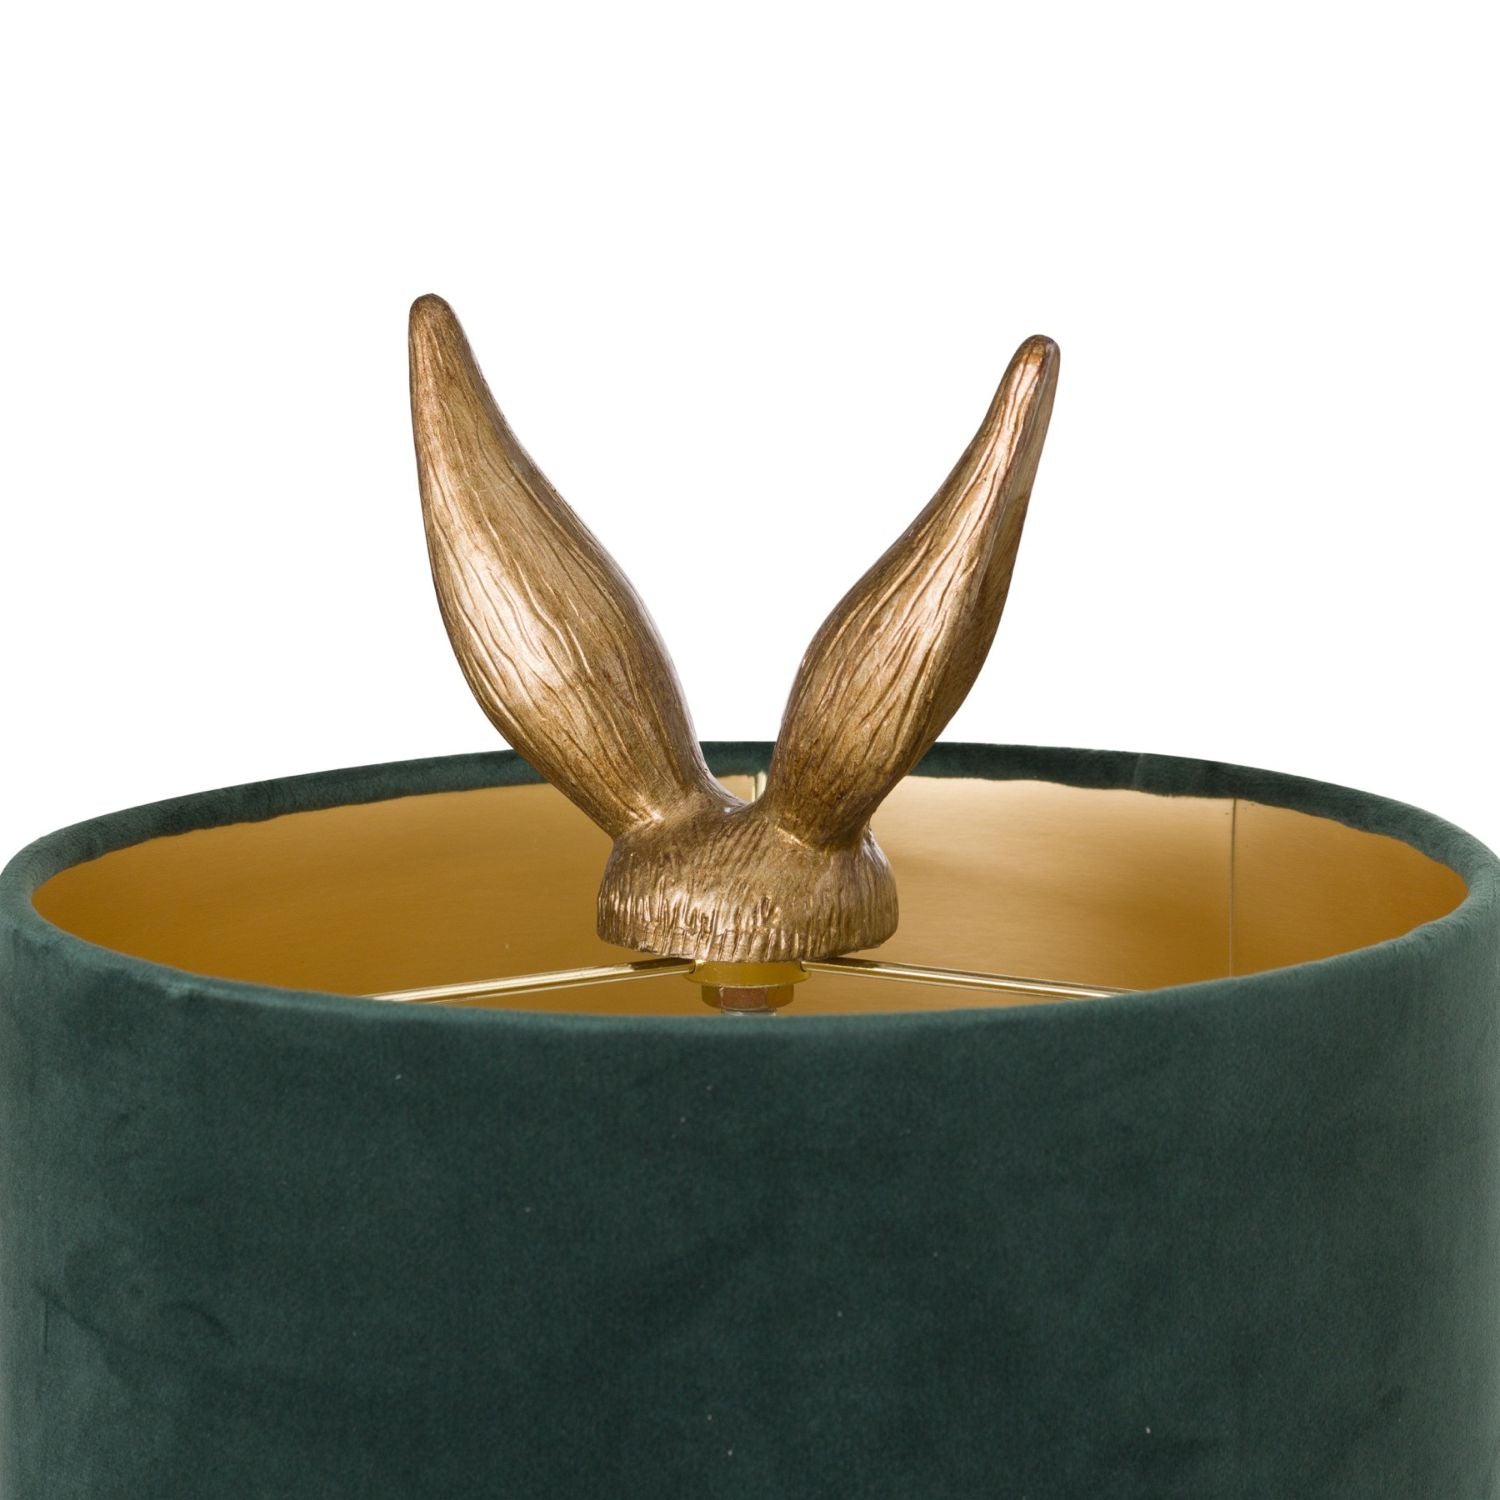 Gold Hare Table Lamp with Green velvet shade